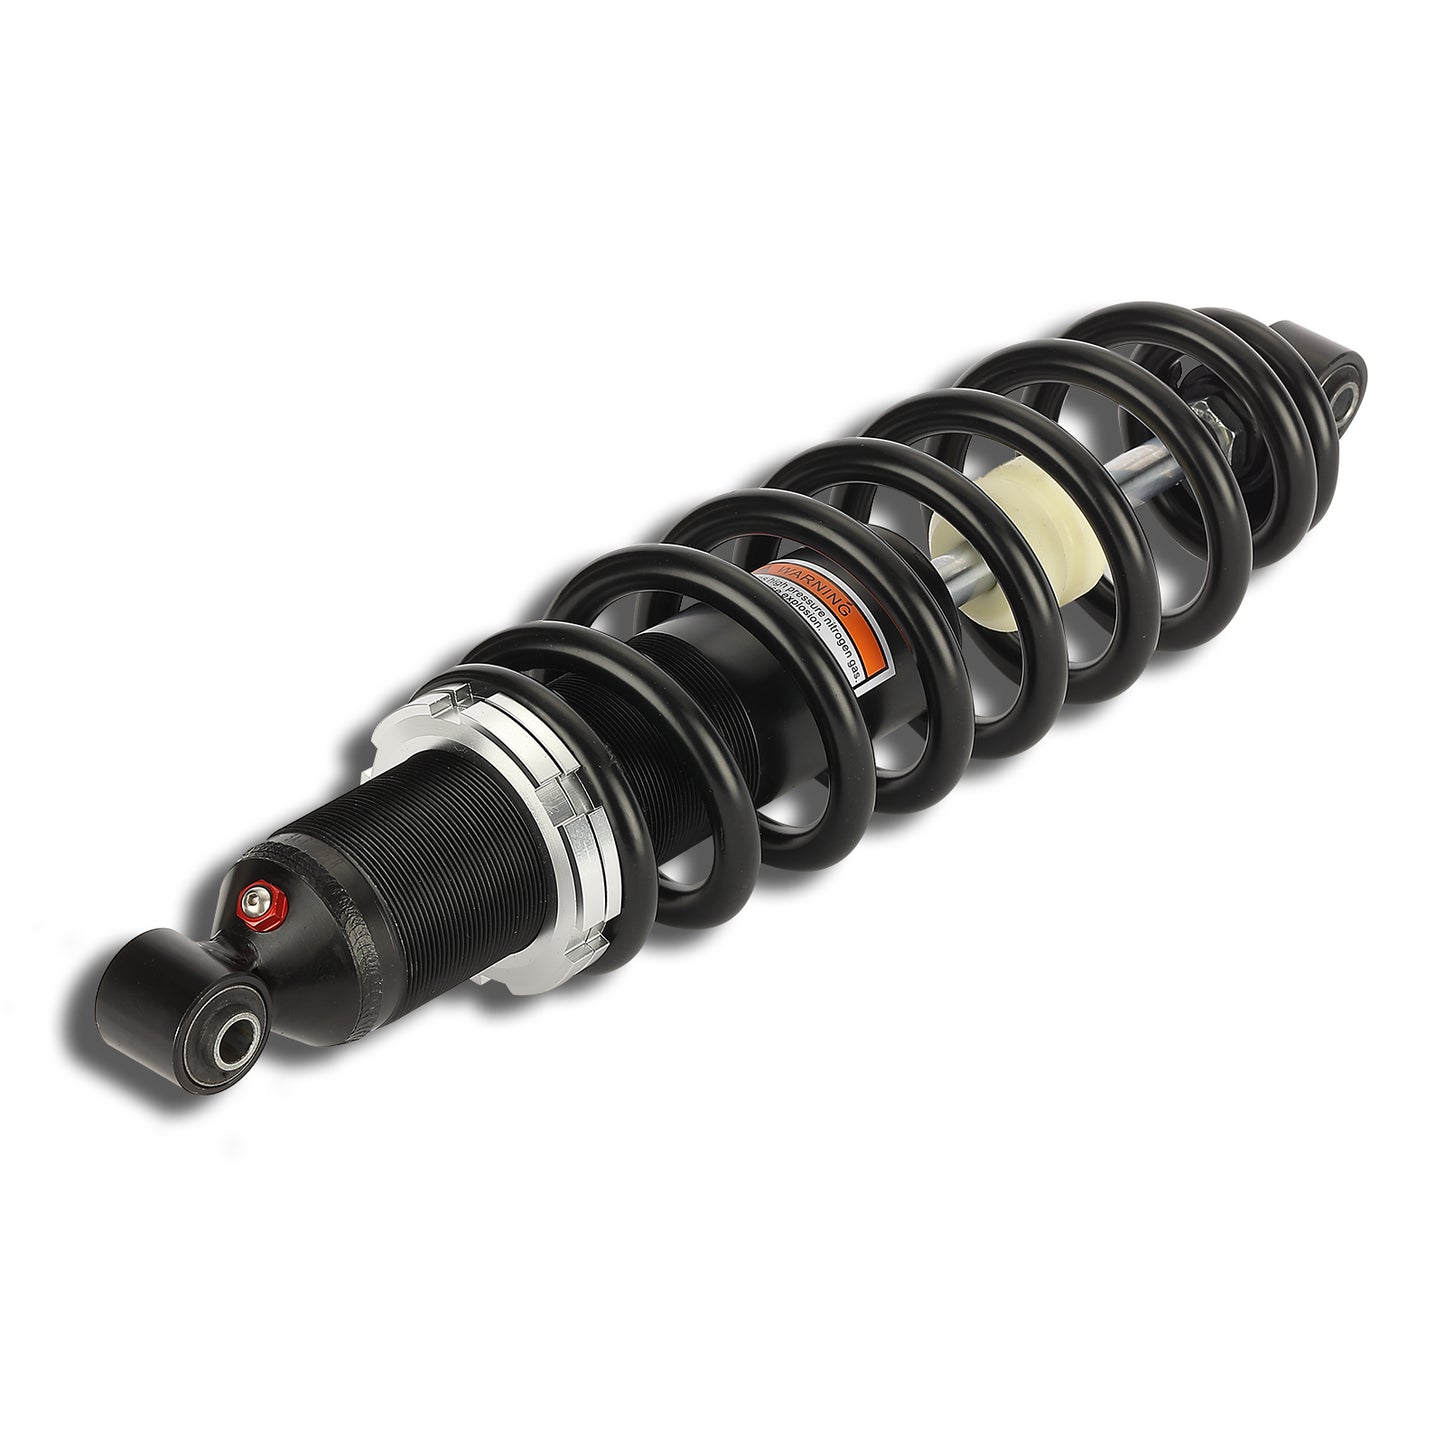 CAM-PO907 Caiman Shock Absorber ATV Rear Left Right Shock Absorber Replacement for 2005-2014 Polaris Ranger 500 2X4 and 4X4 XP 700 4X4 800 4X4 Crew 800 4X4 XP 800 4X4 Rear Shock